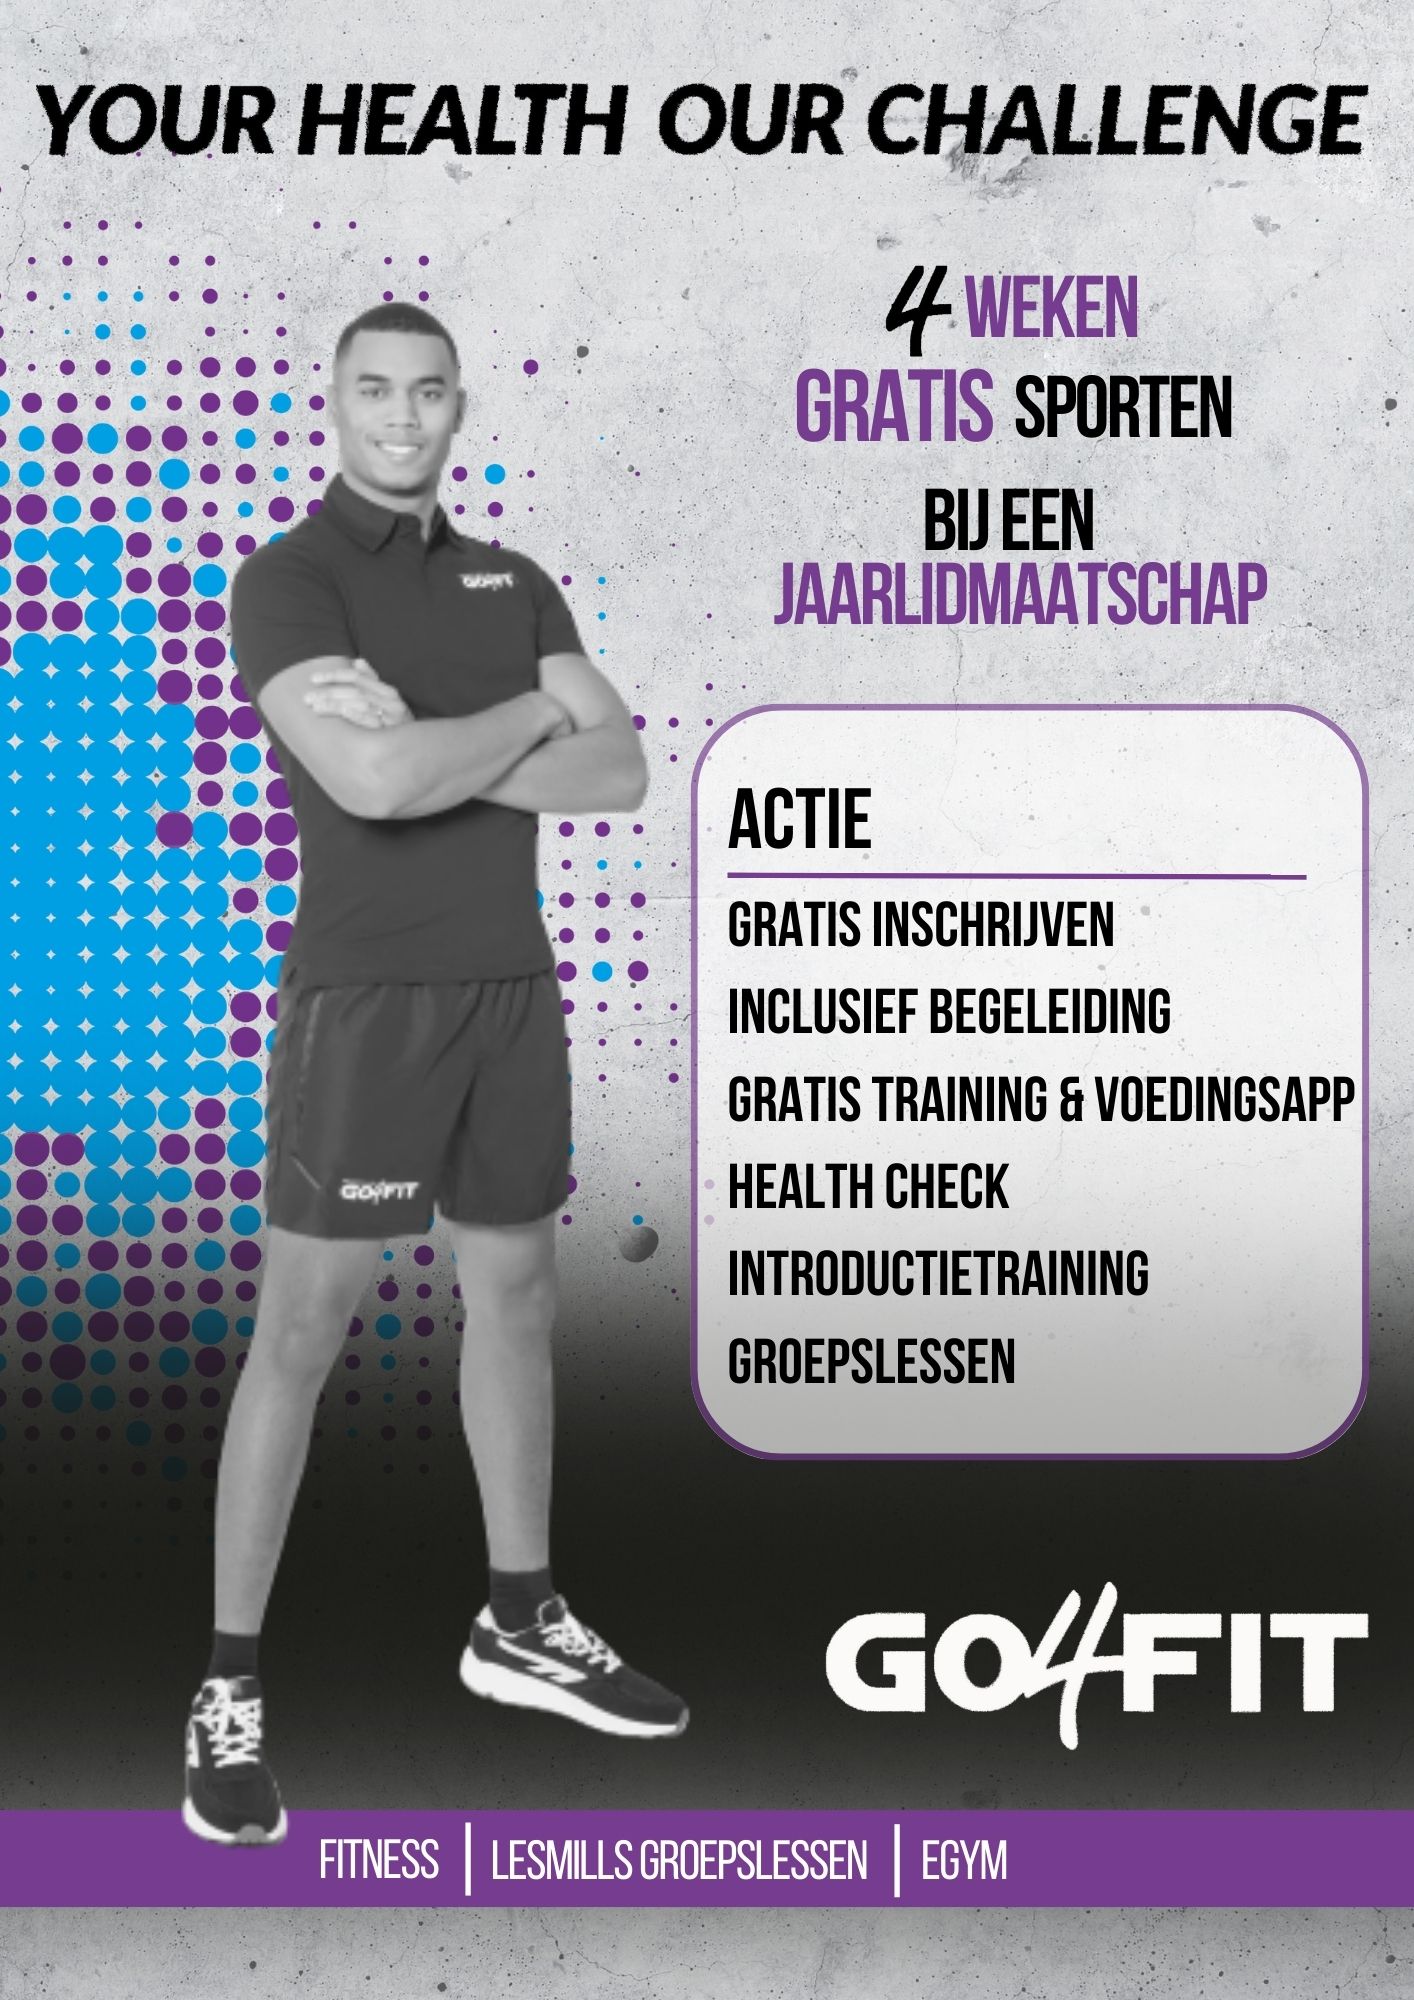 Go4Fit